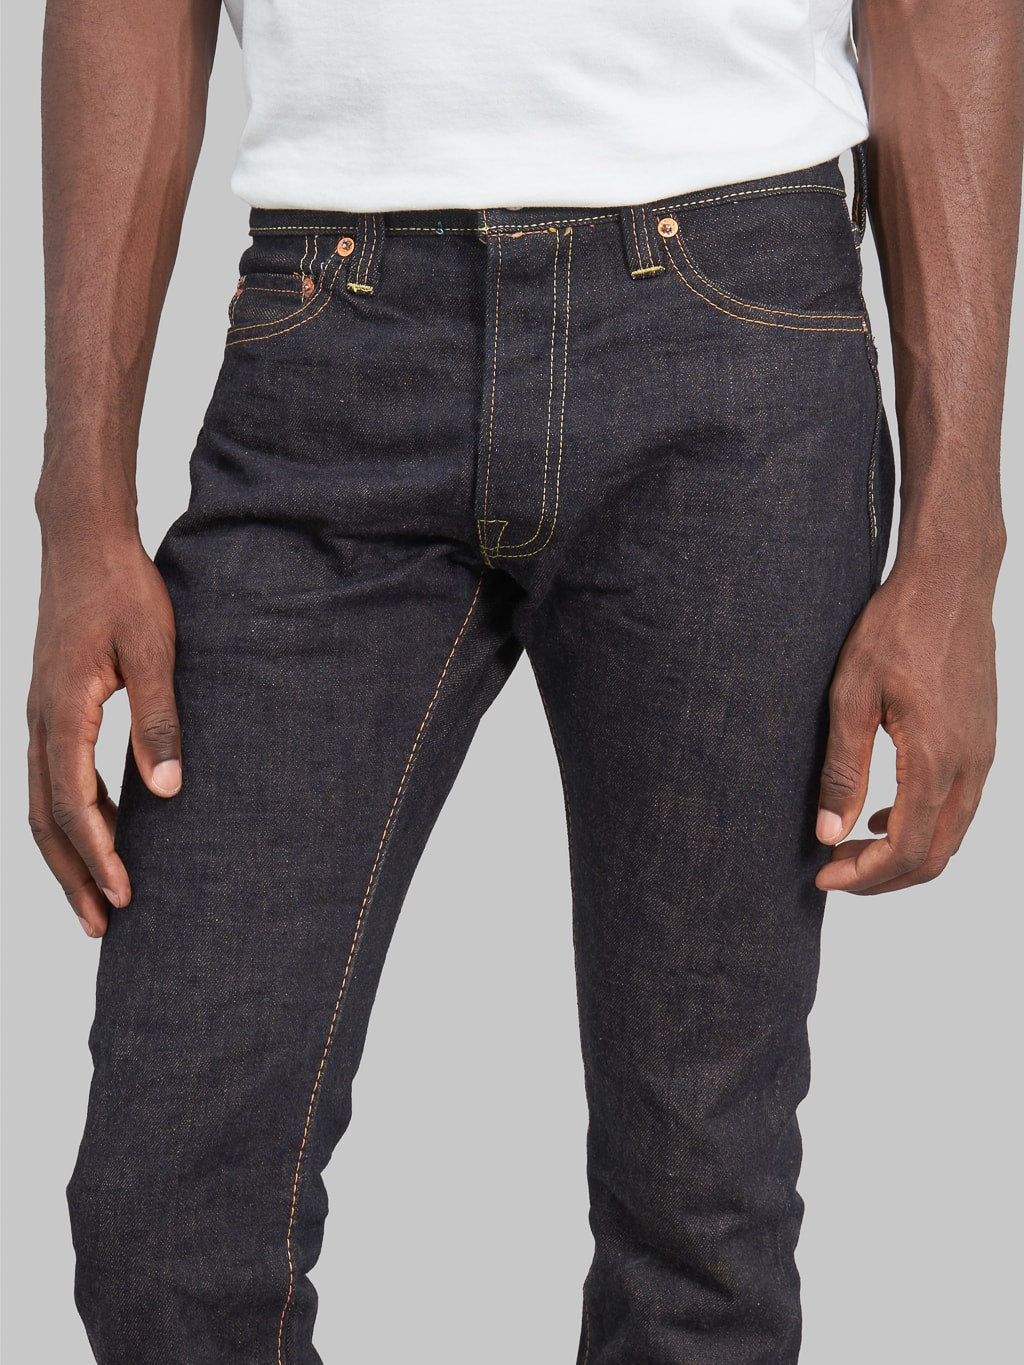 The Strike Gold Brown Weft Slim Tapered Jeans front rise